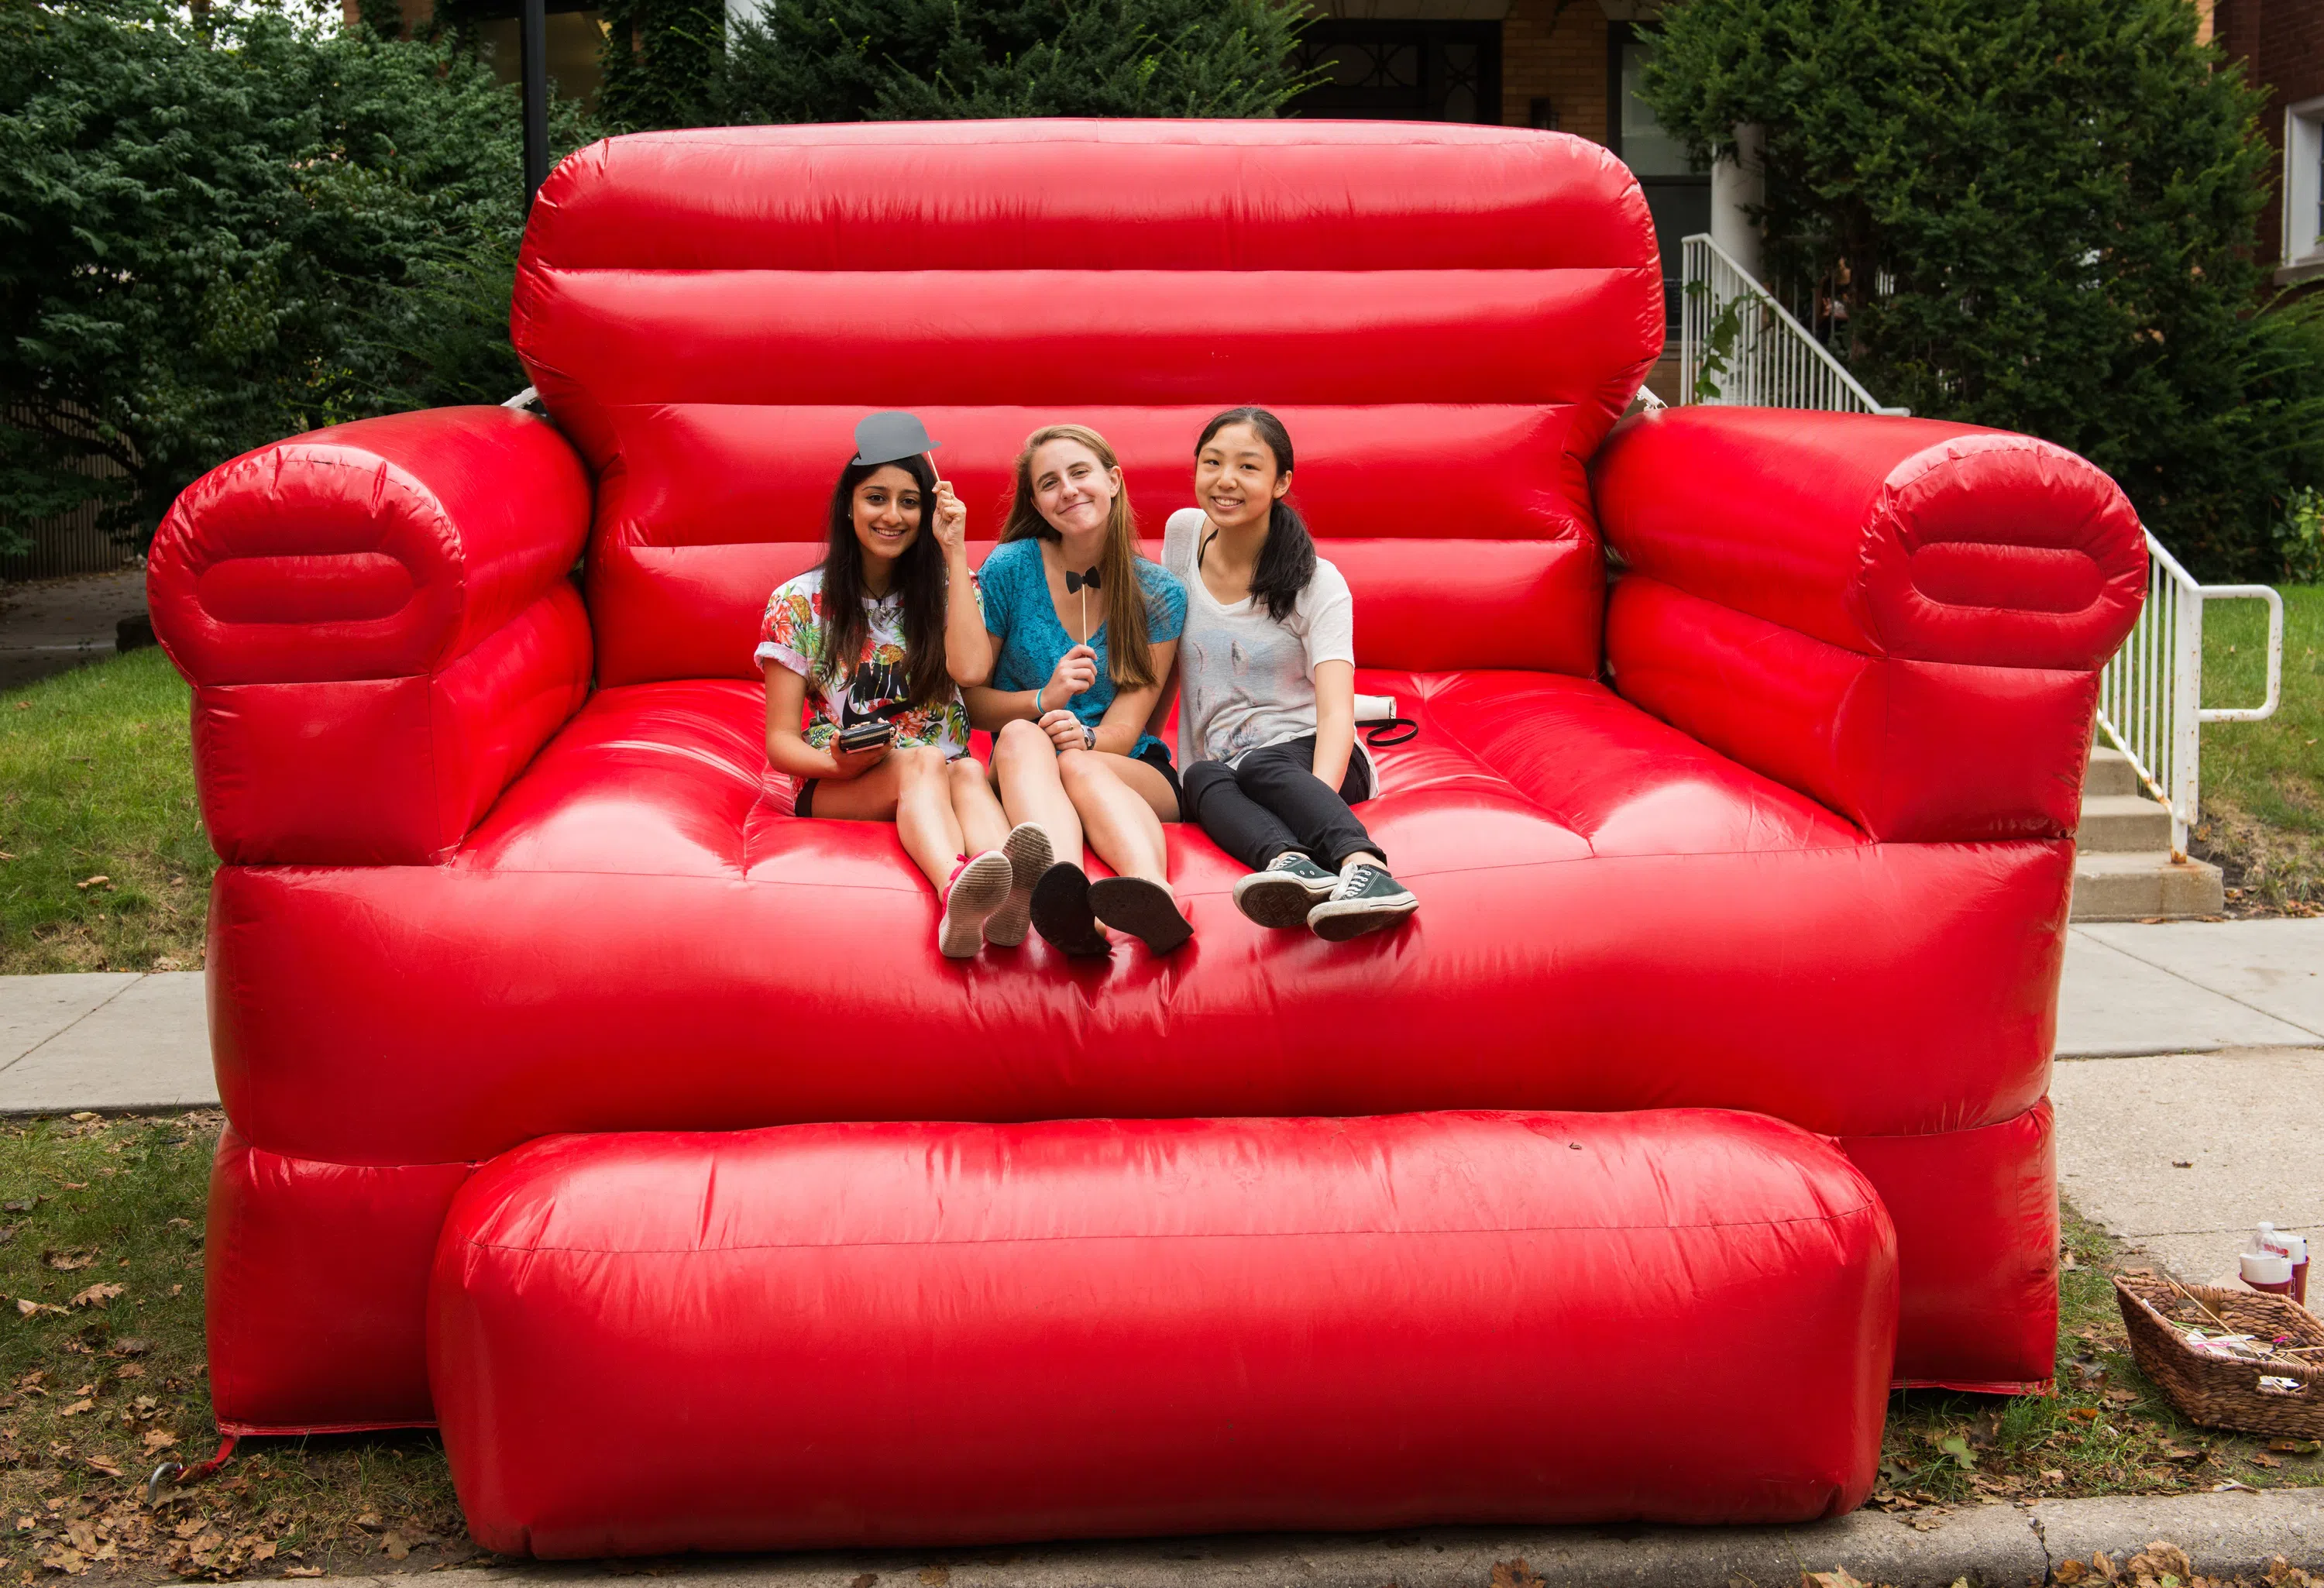 3 students sitting on a giant red inflatable sofa